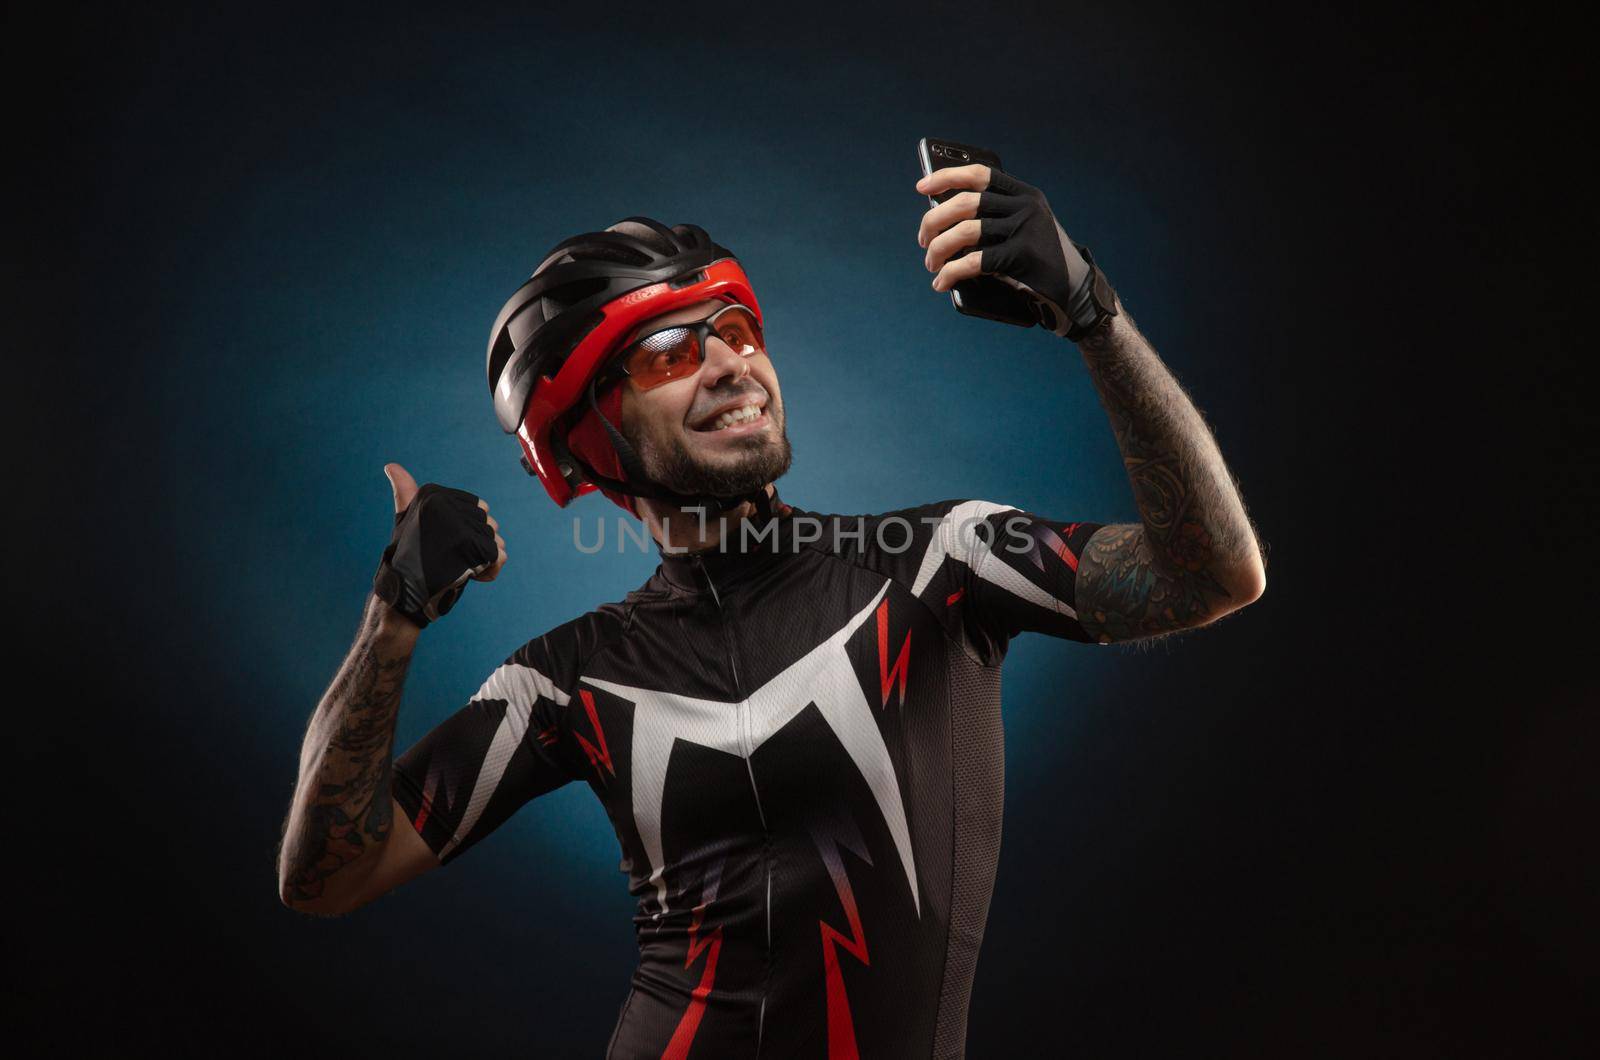 guy is a cyclist in a Bicycle helmet takes a selfie